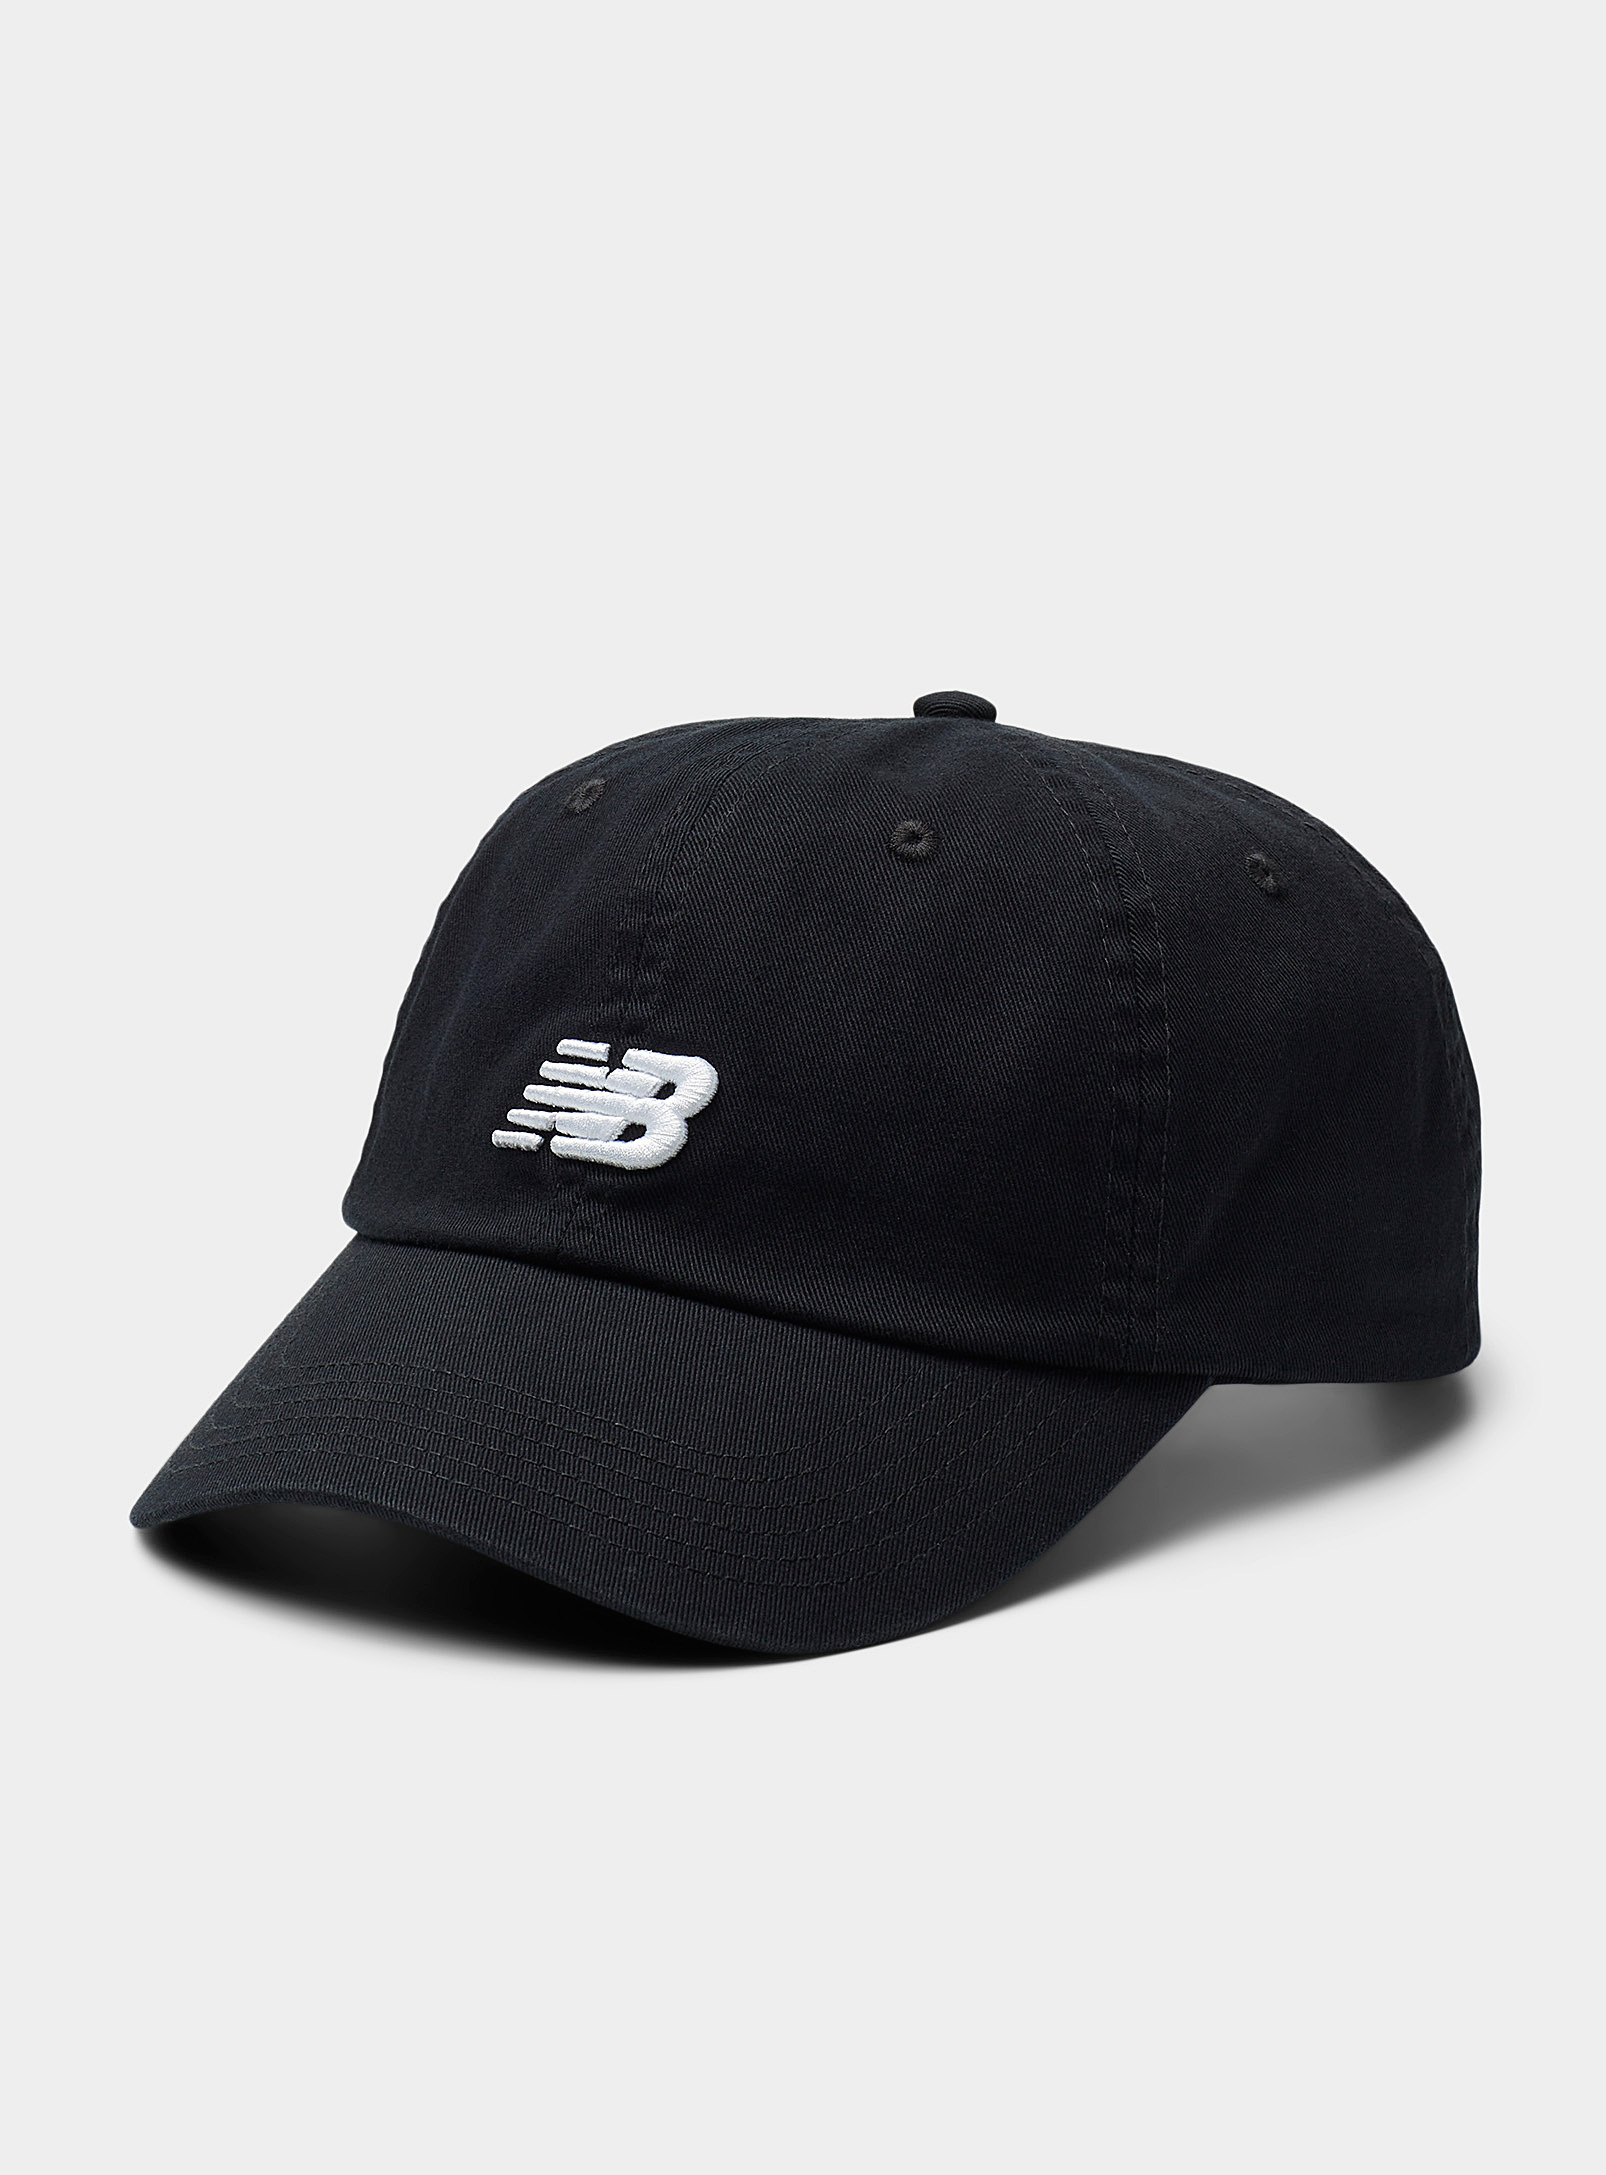 New Balance Embroidered-logo Dad Cap In Black